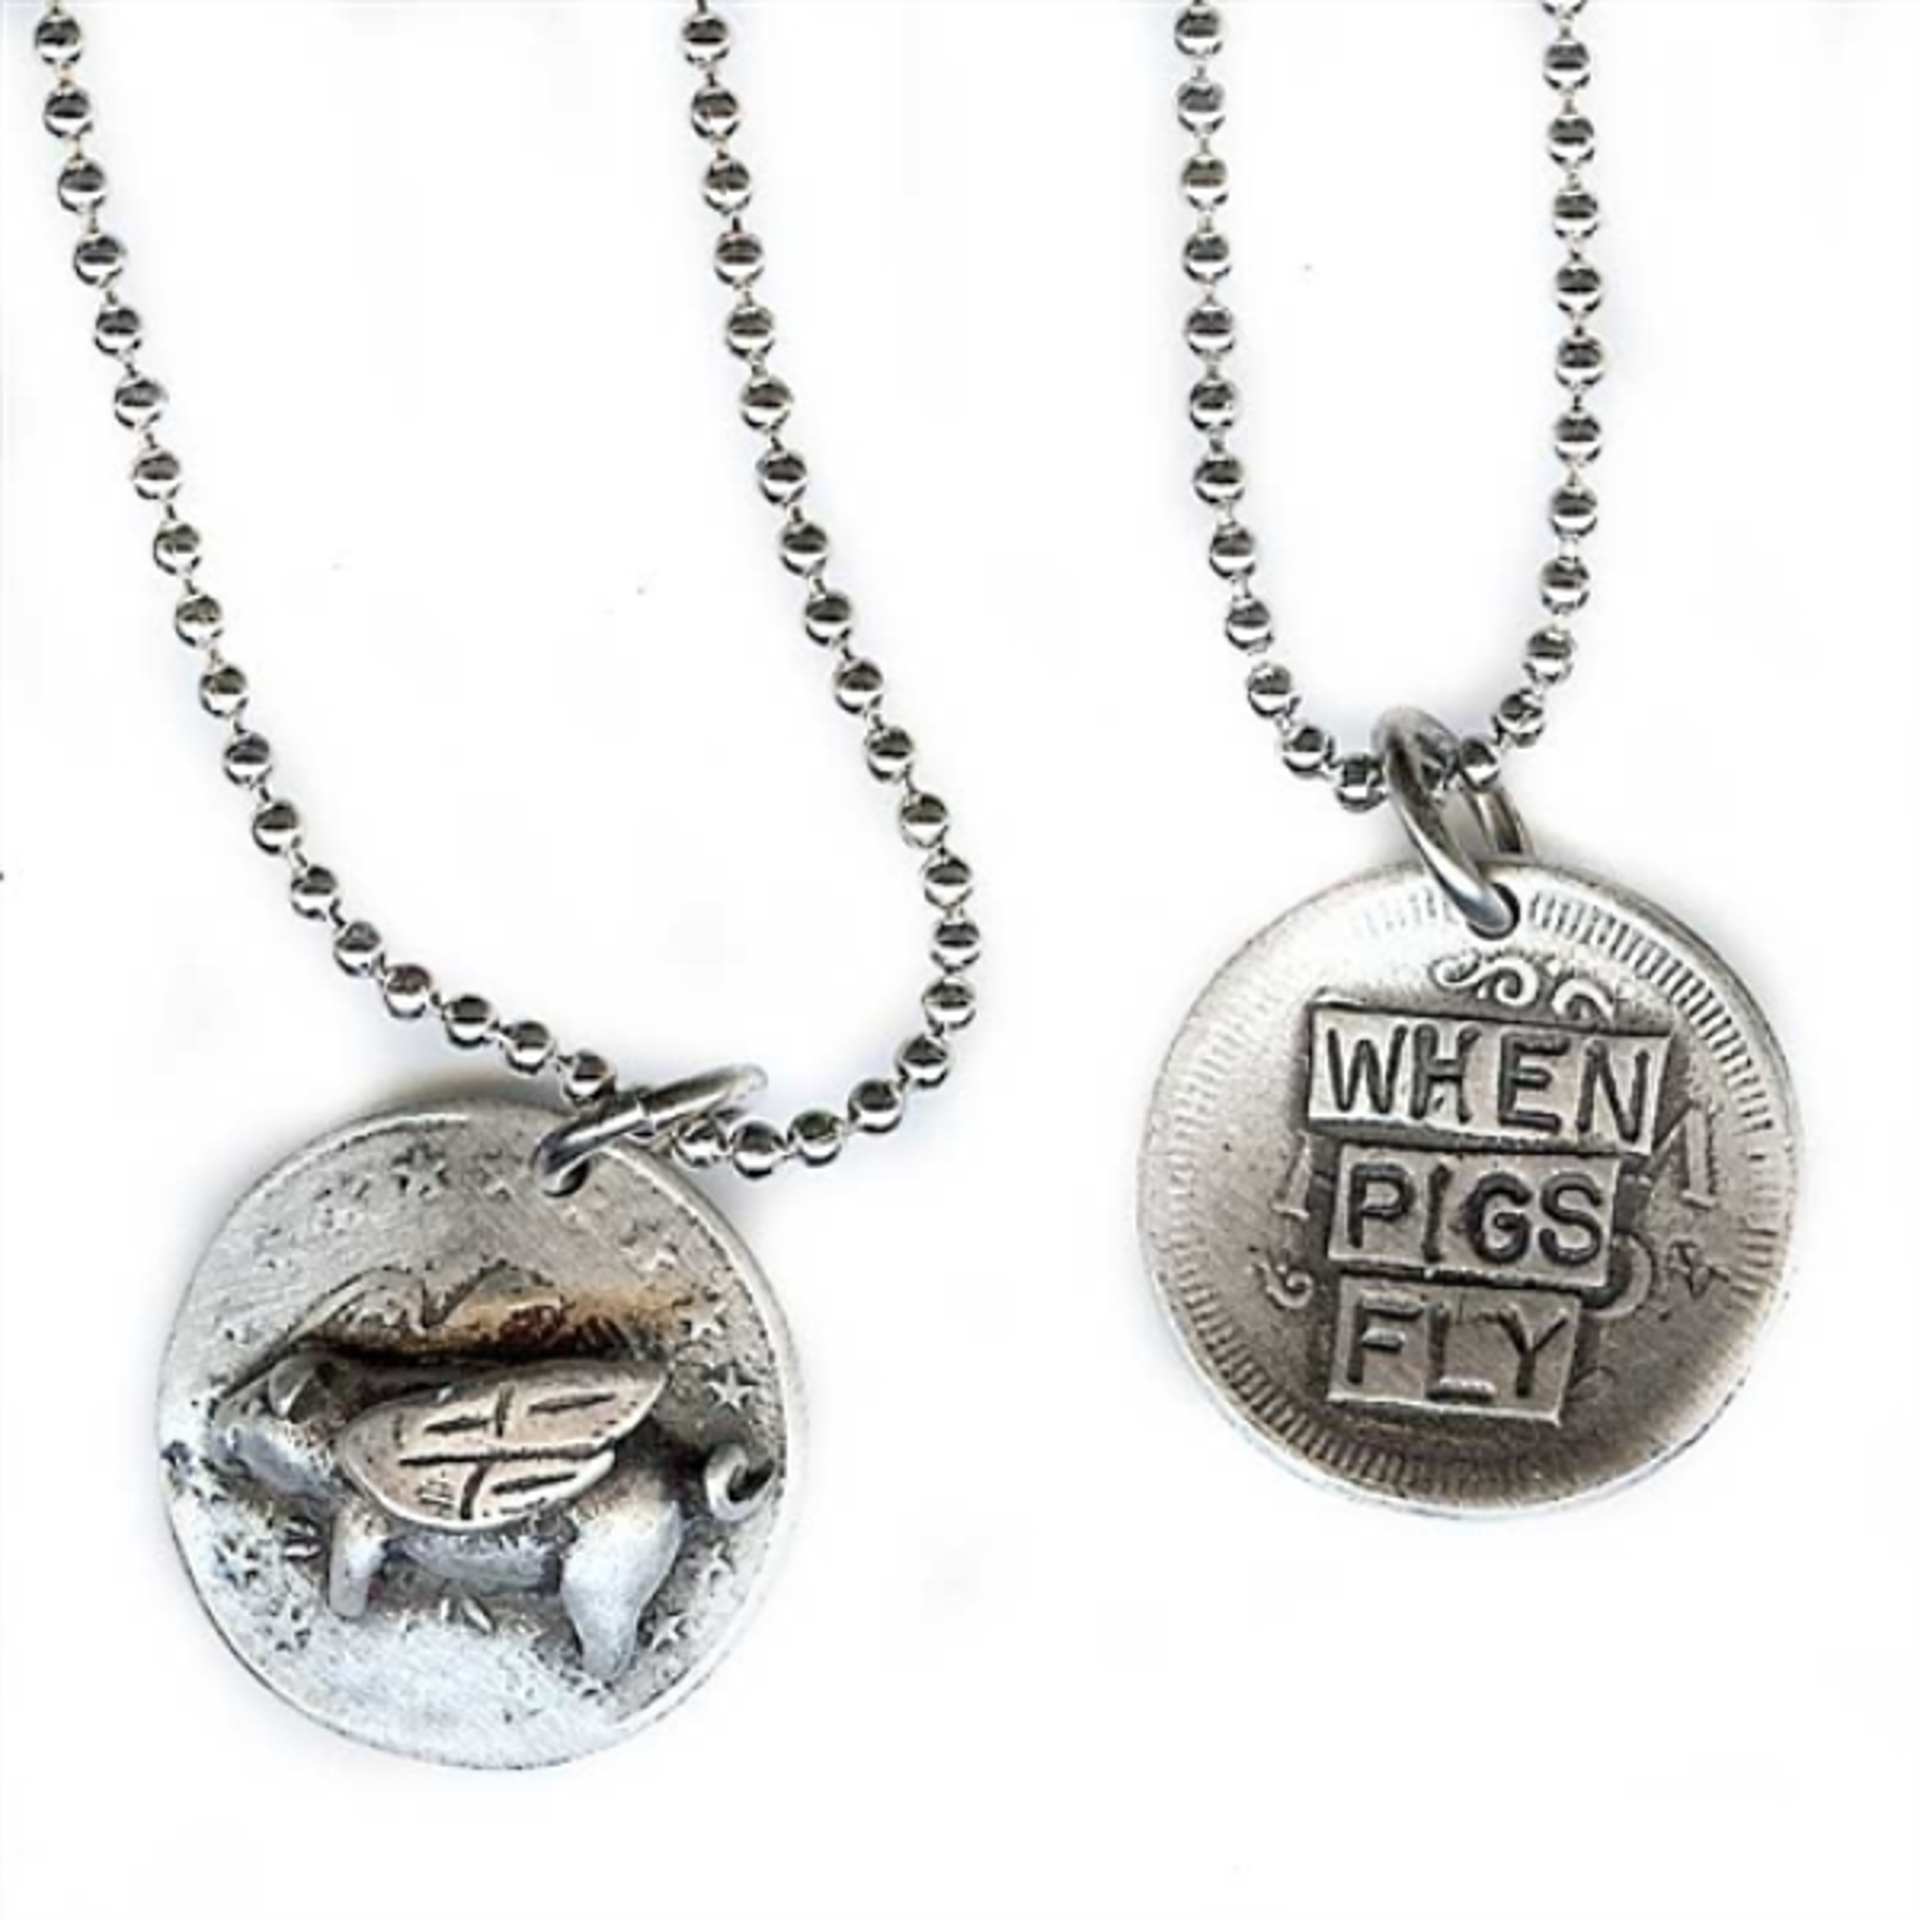 Pendant - When Pigs Fly by Indigo Desert Ranch - Jewelry